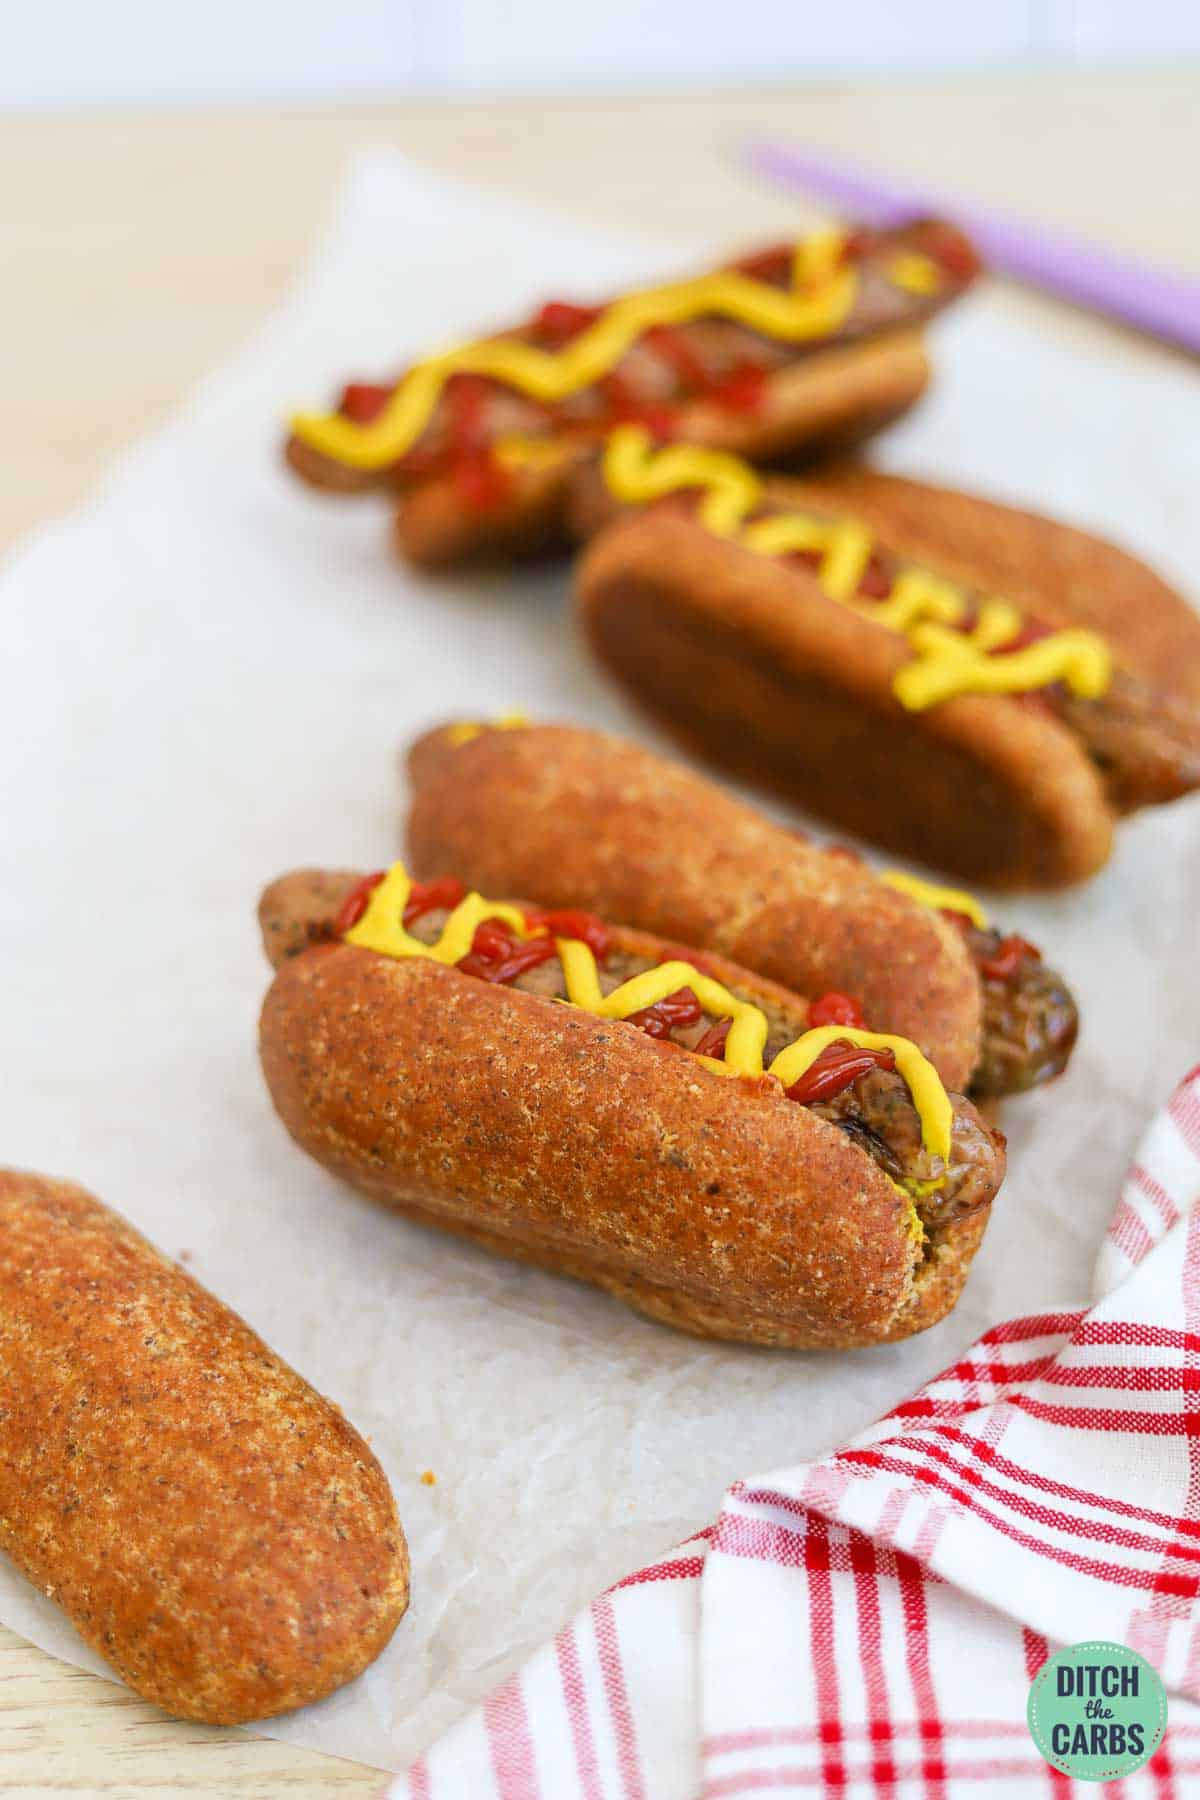 Four keto hot dog buns stuffed with hot dogs and topped with yellow mustard and sugar-free ketchup on a piece of parchment paper.